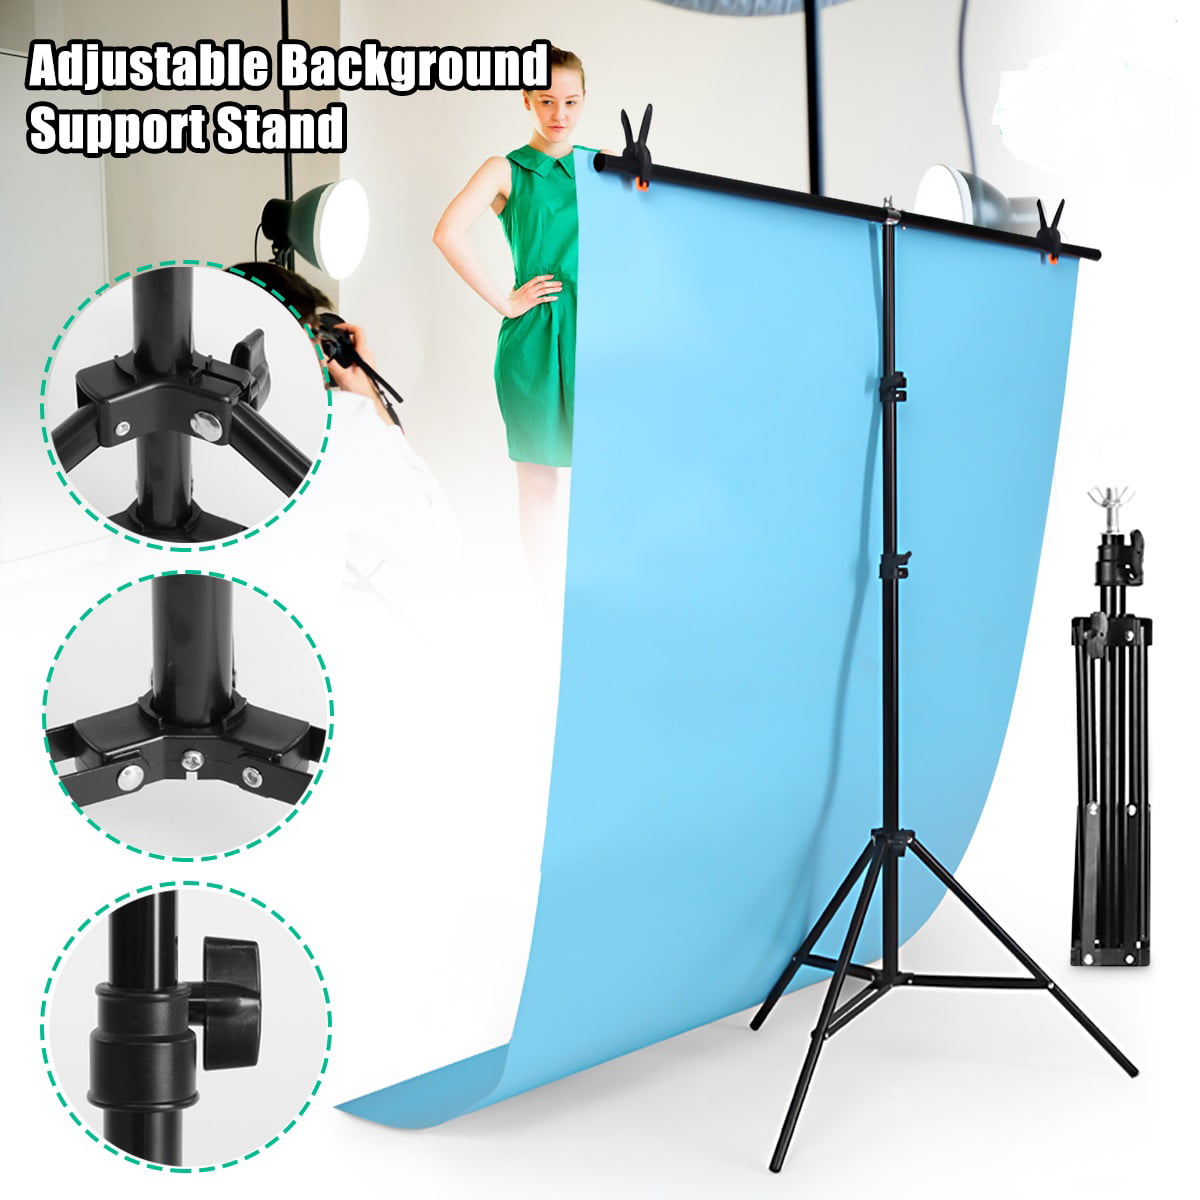 Background Stand Photo Video Studio Background Backdrop Stand Kit,2x2m Photography Support System,Product Photography and Video Shooting